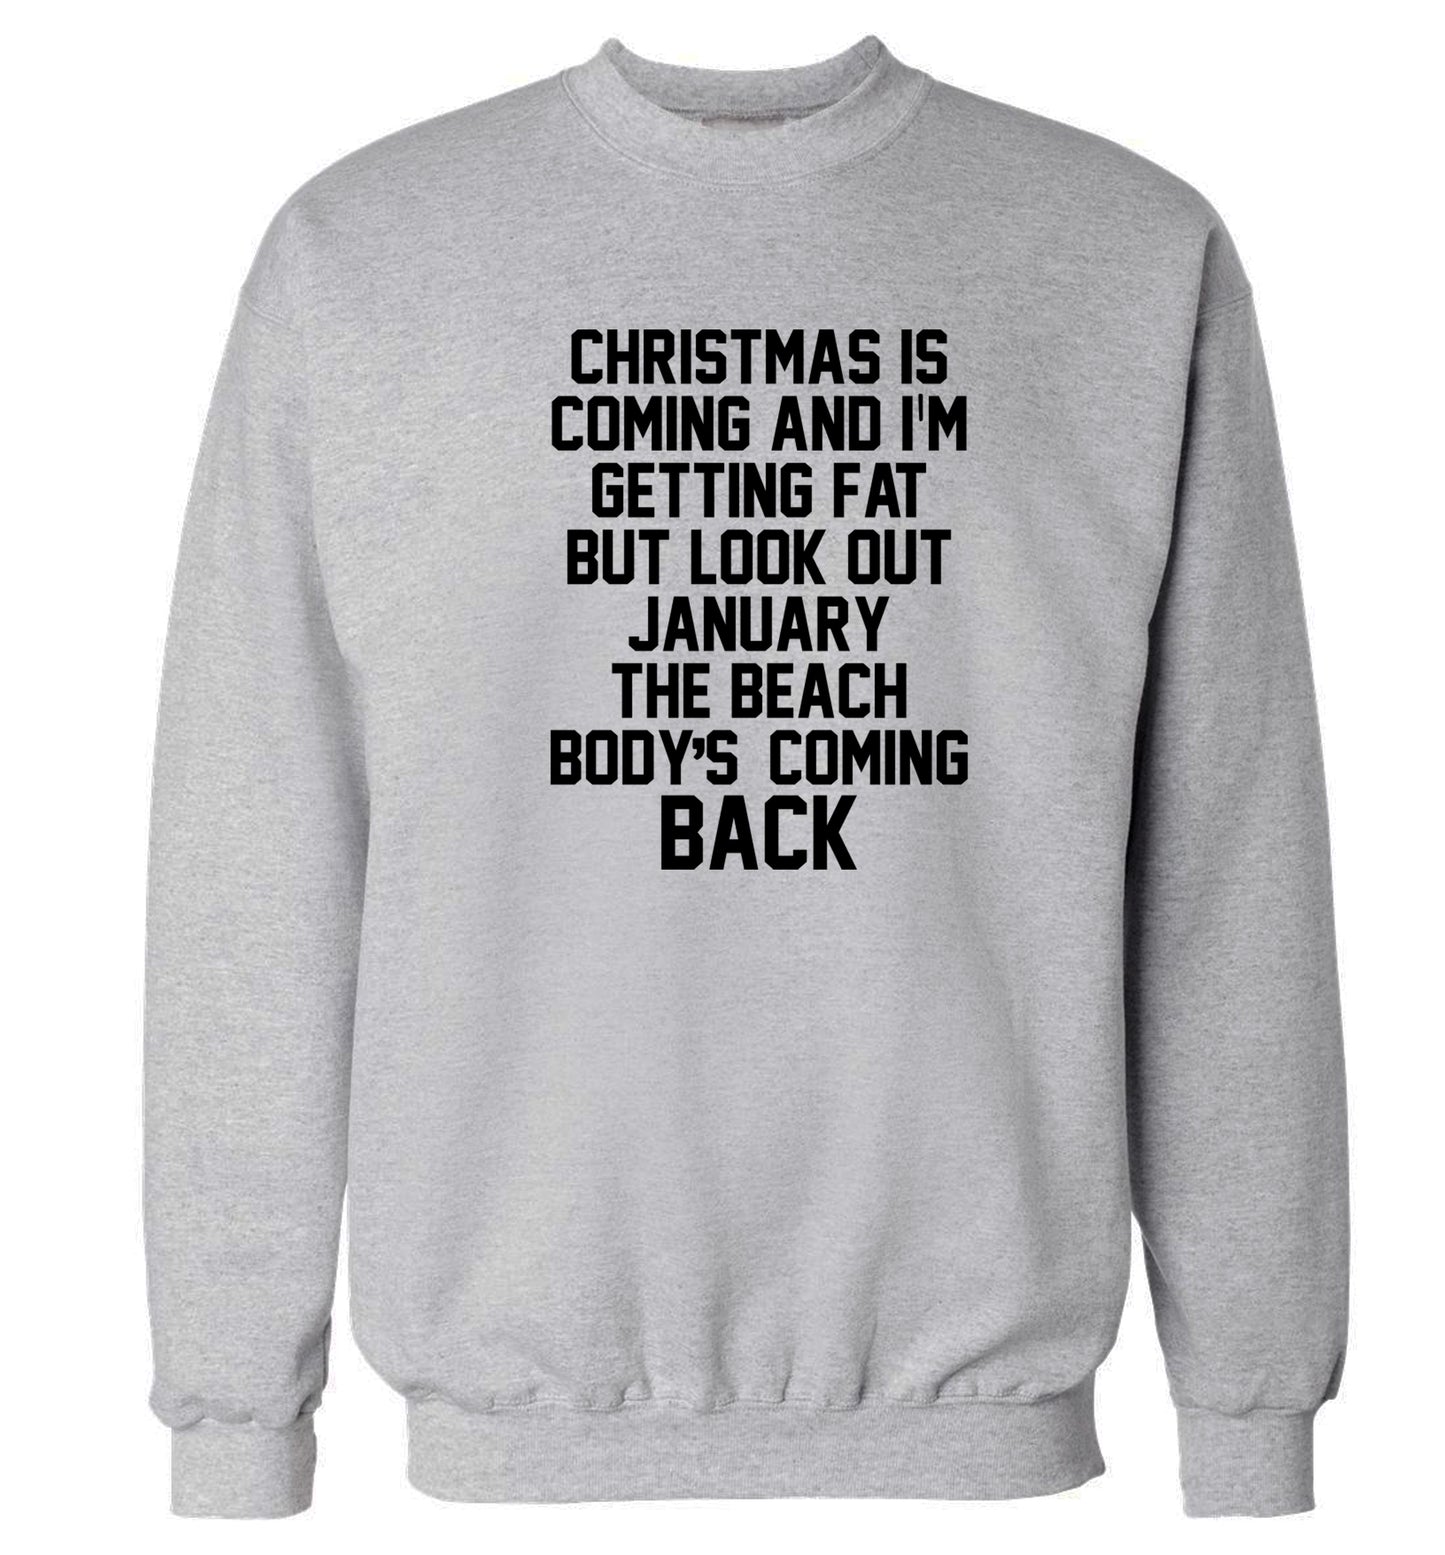 Christmas is coming and I'm getting fat but look out January the beach body's coming back! Adult's unisex grey Sweater 2XL